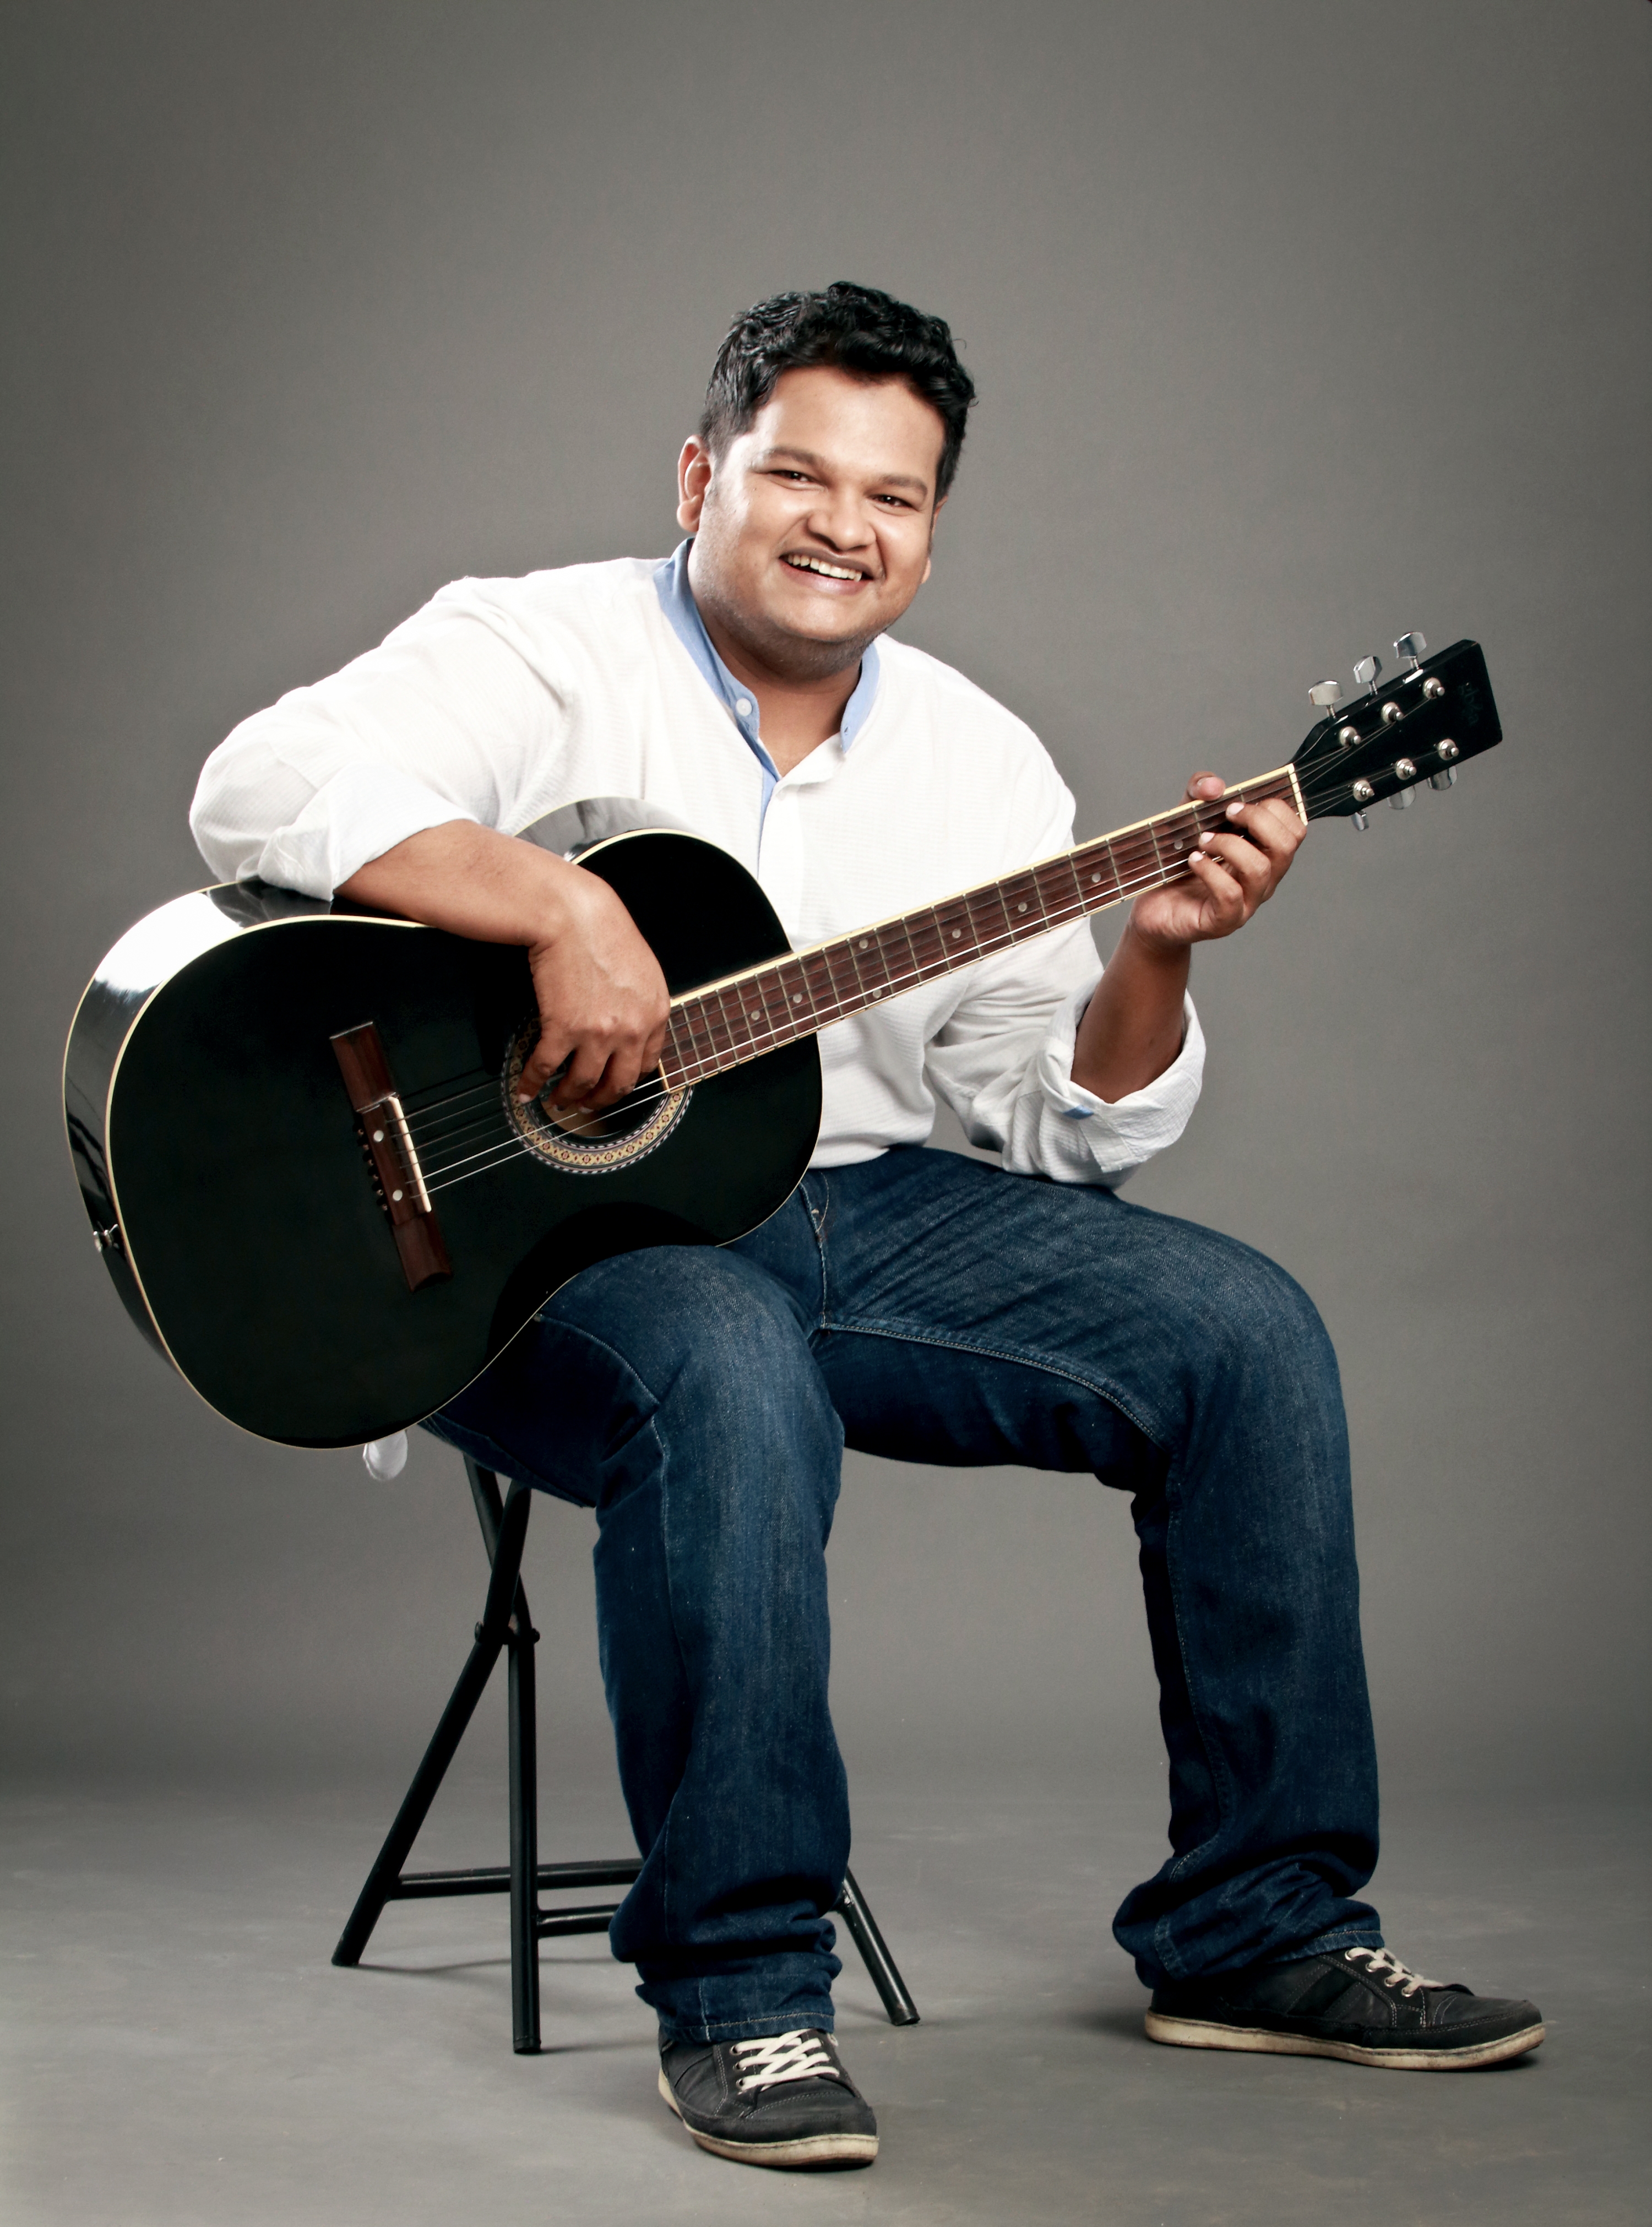 Ghibran's happy but why?